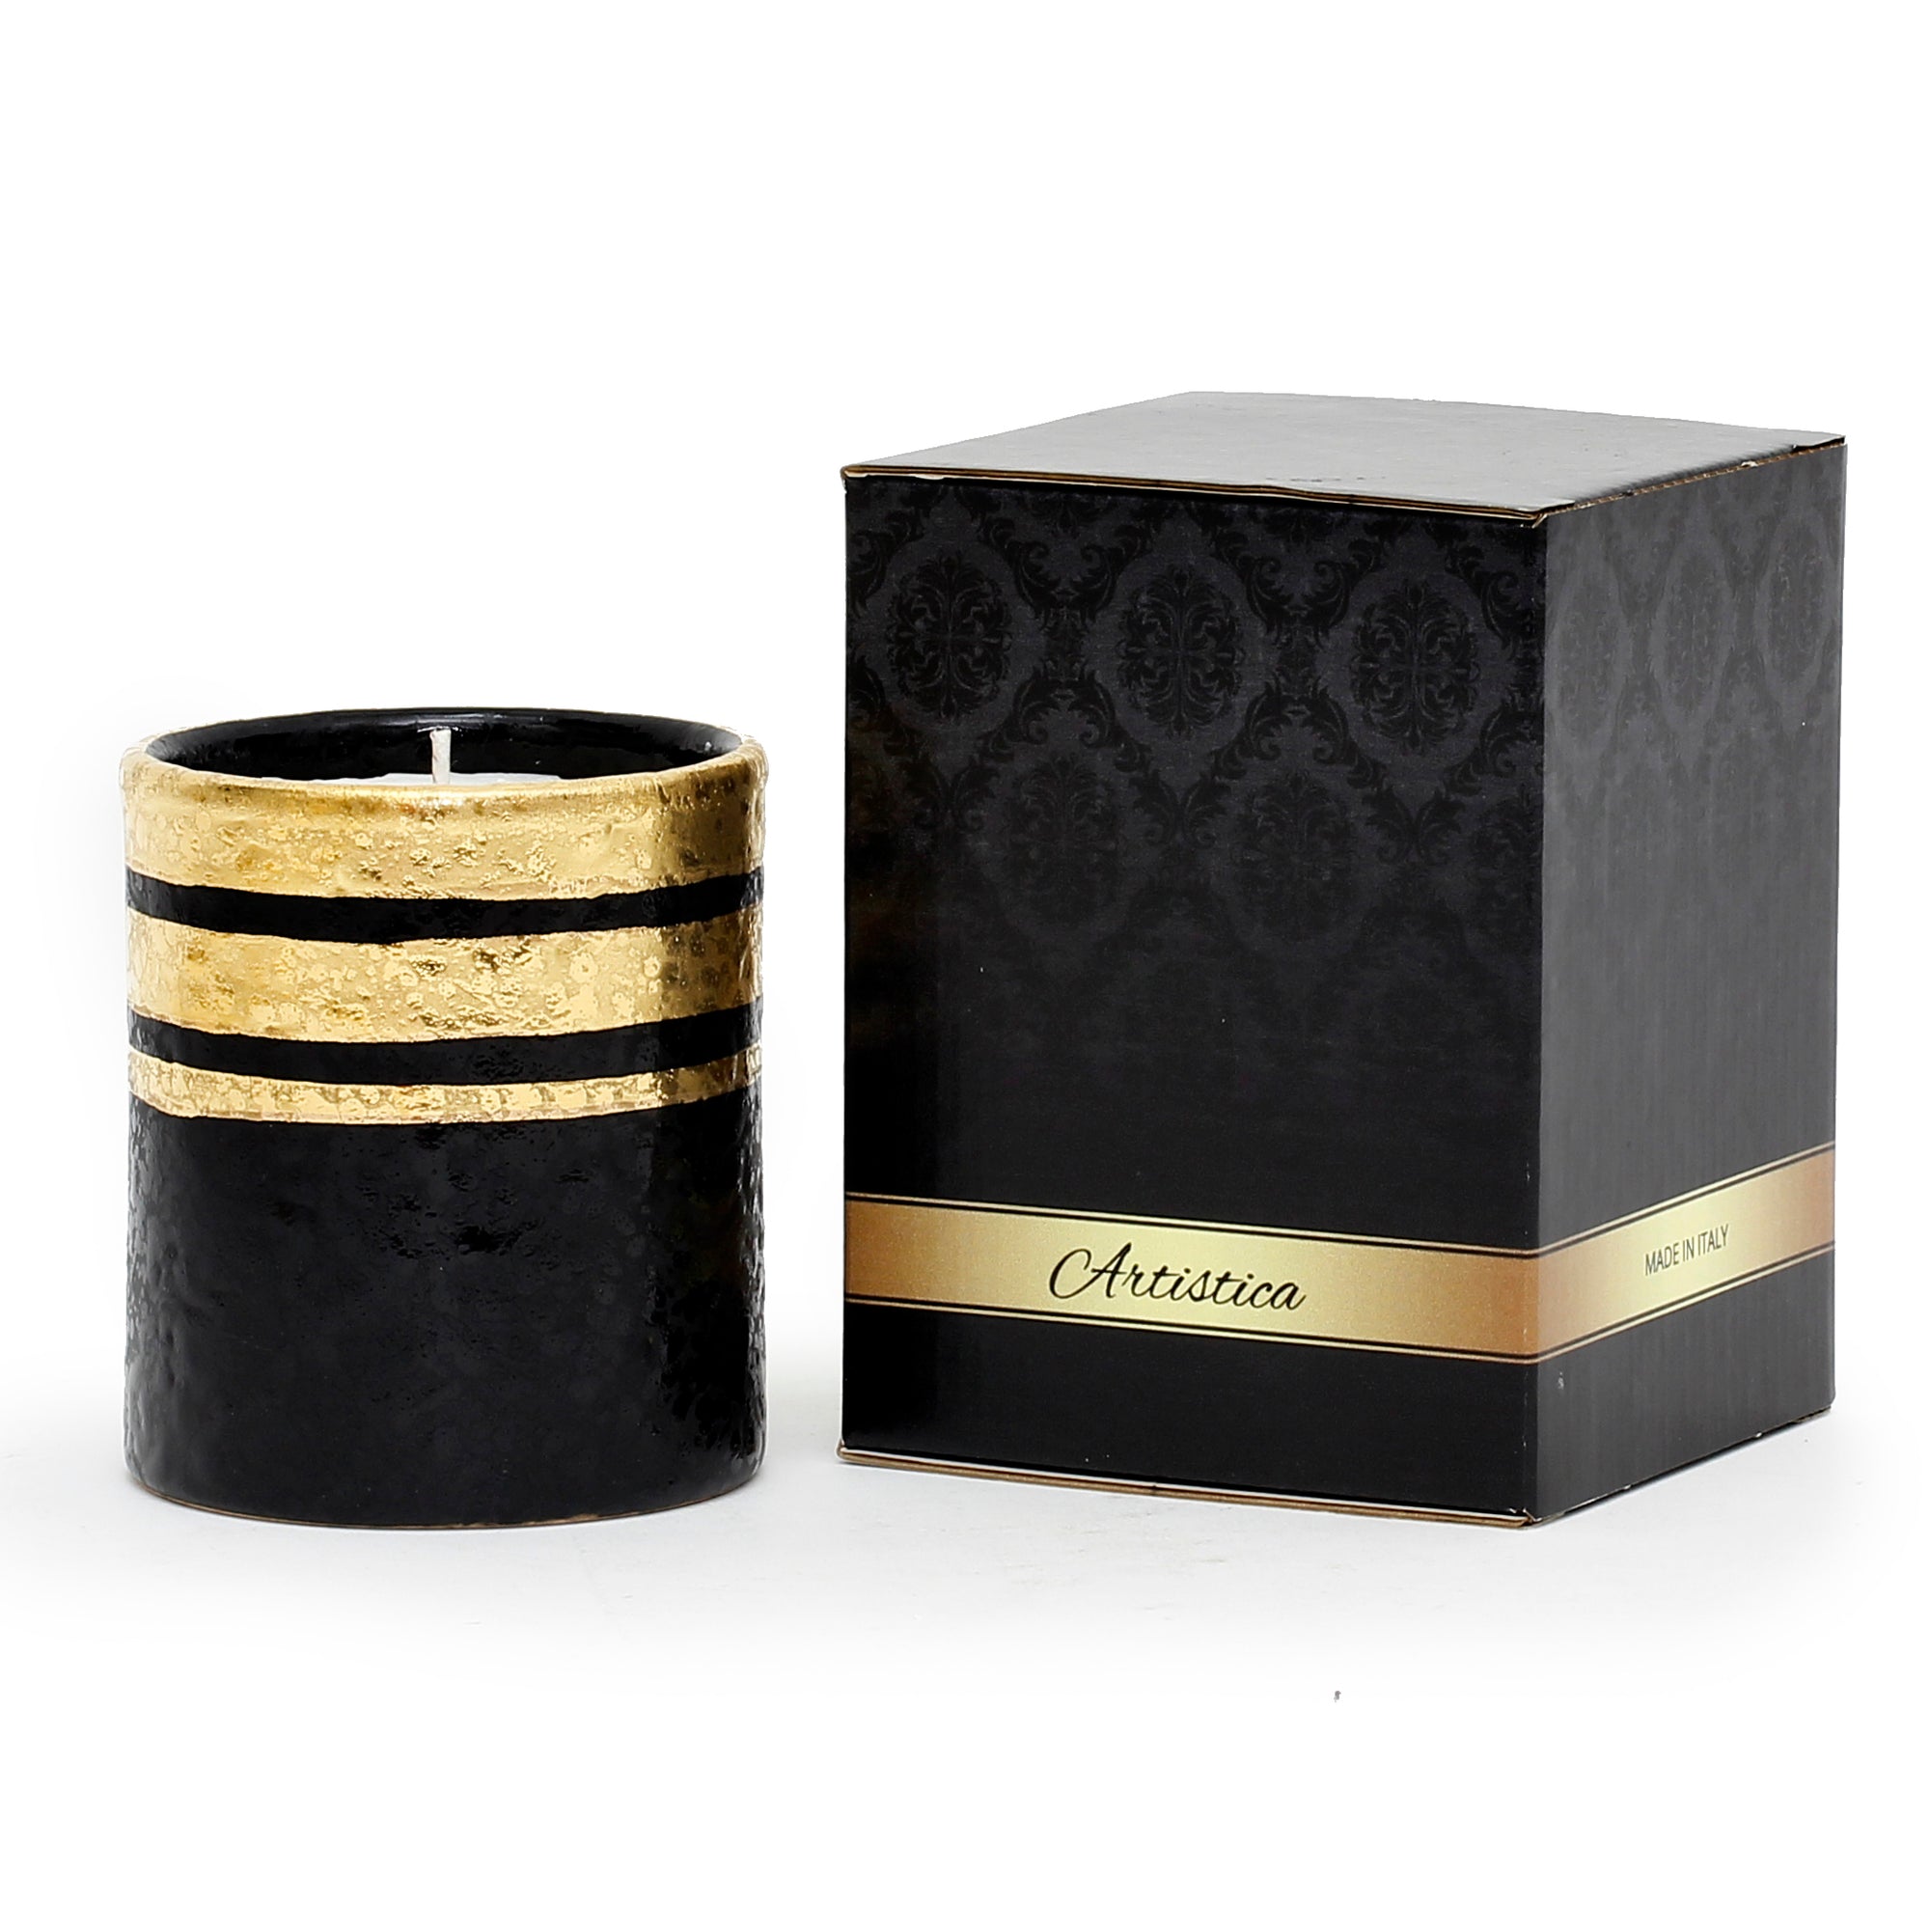 HOLIDAYS DERUTA MILANO: Candle Black with Hand Painted Pure Gold Stripes - Artistica.com